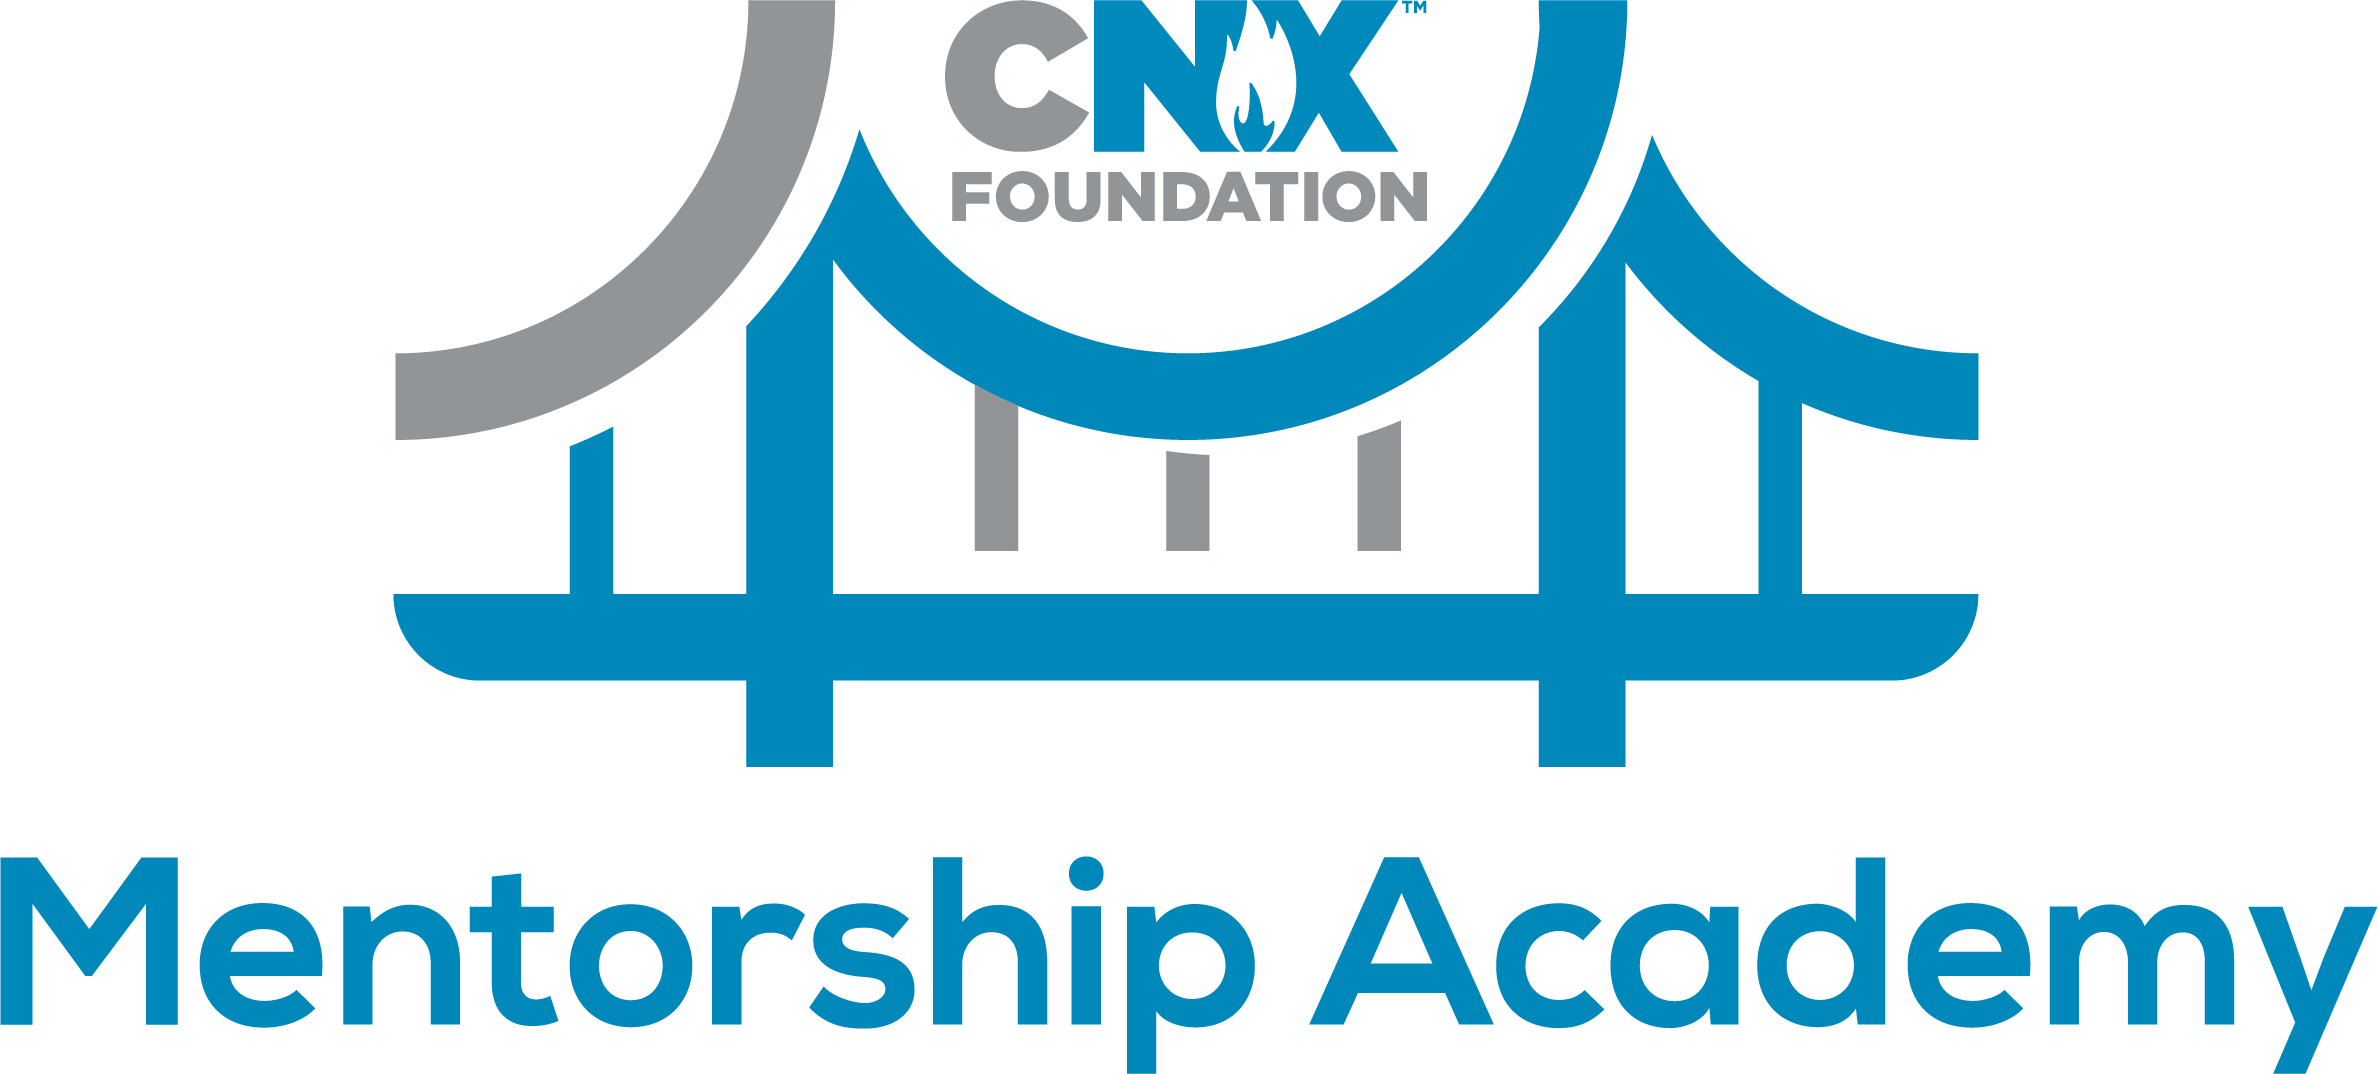 CNX Foundation logo with the text below the bridge logo that reads: Mentorship Academy